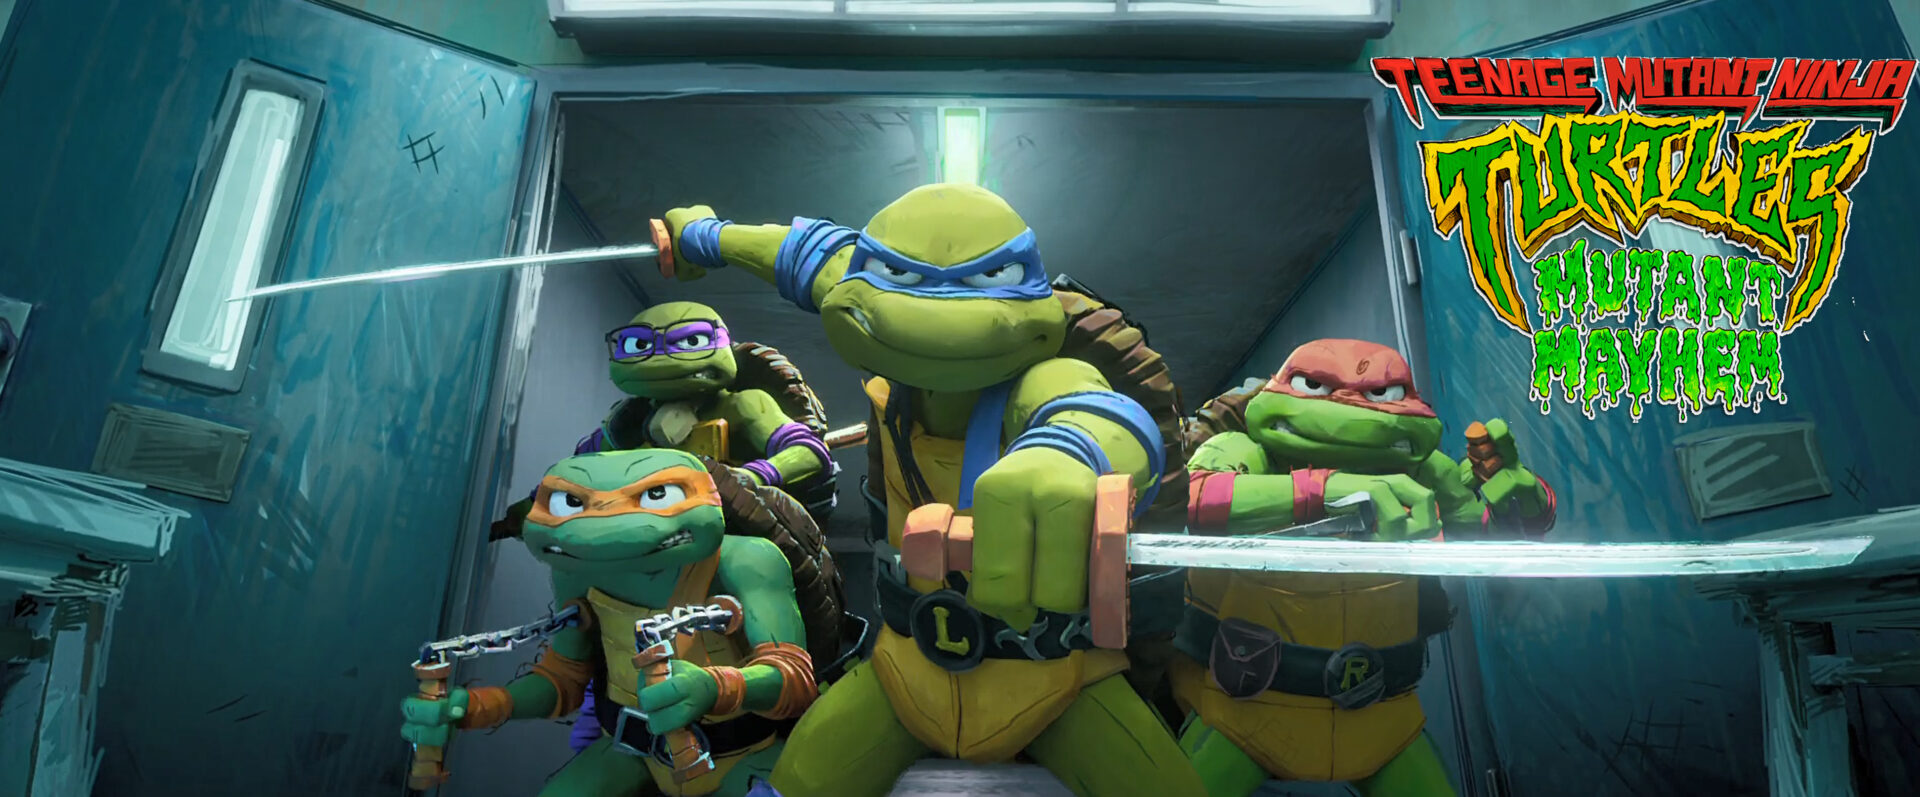 Featured image for “The Official Trailer For “Teenage Mutant Ninja Turtles: Mutant Mayhem” Reminds Us That The Turtle Brothers are AWESOME!”